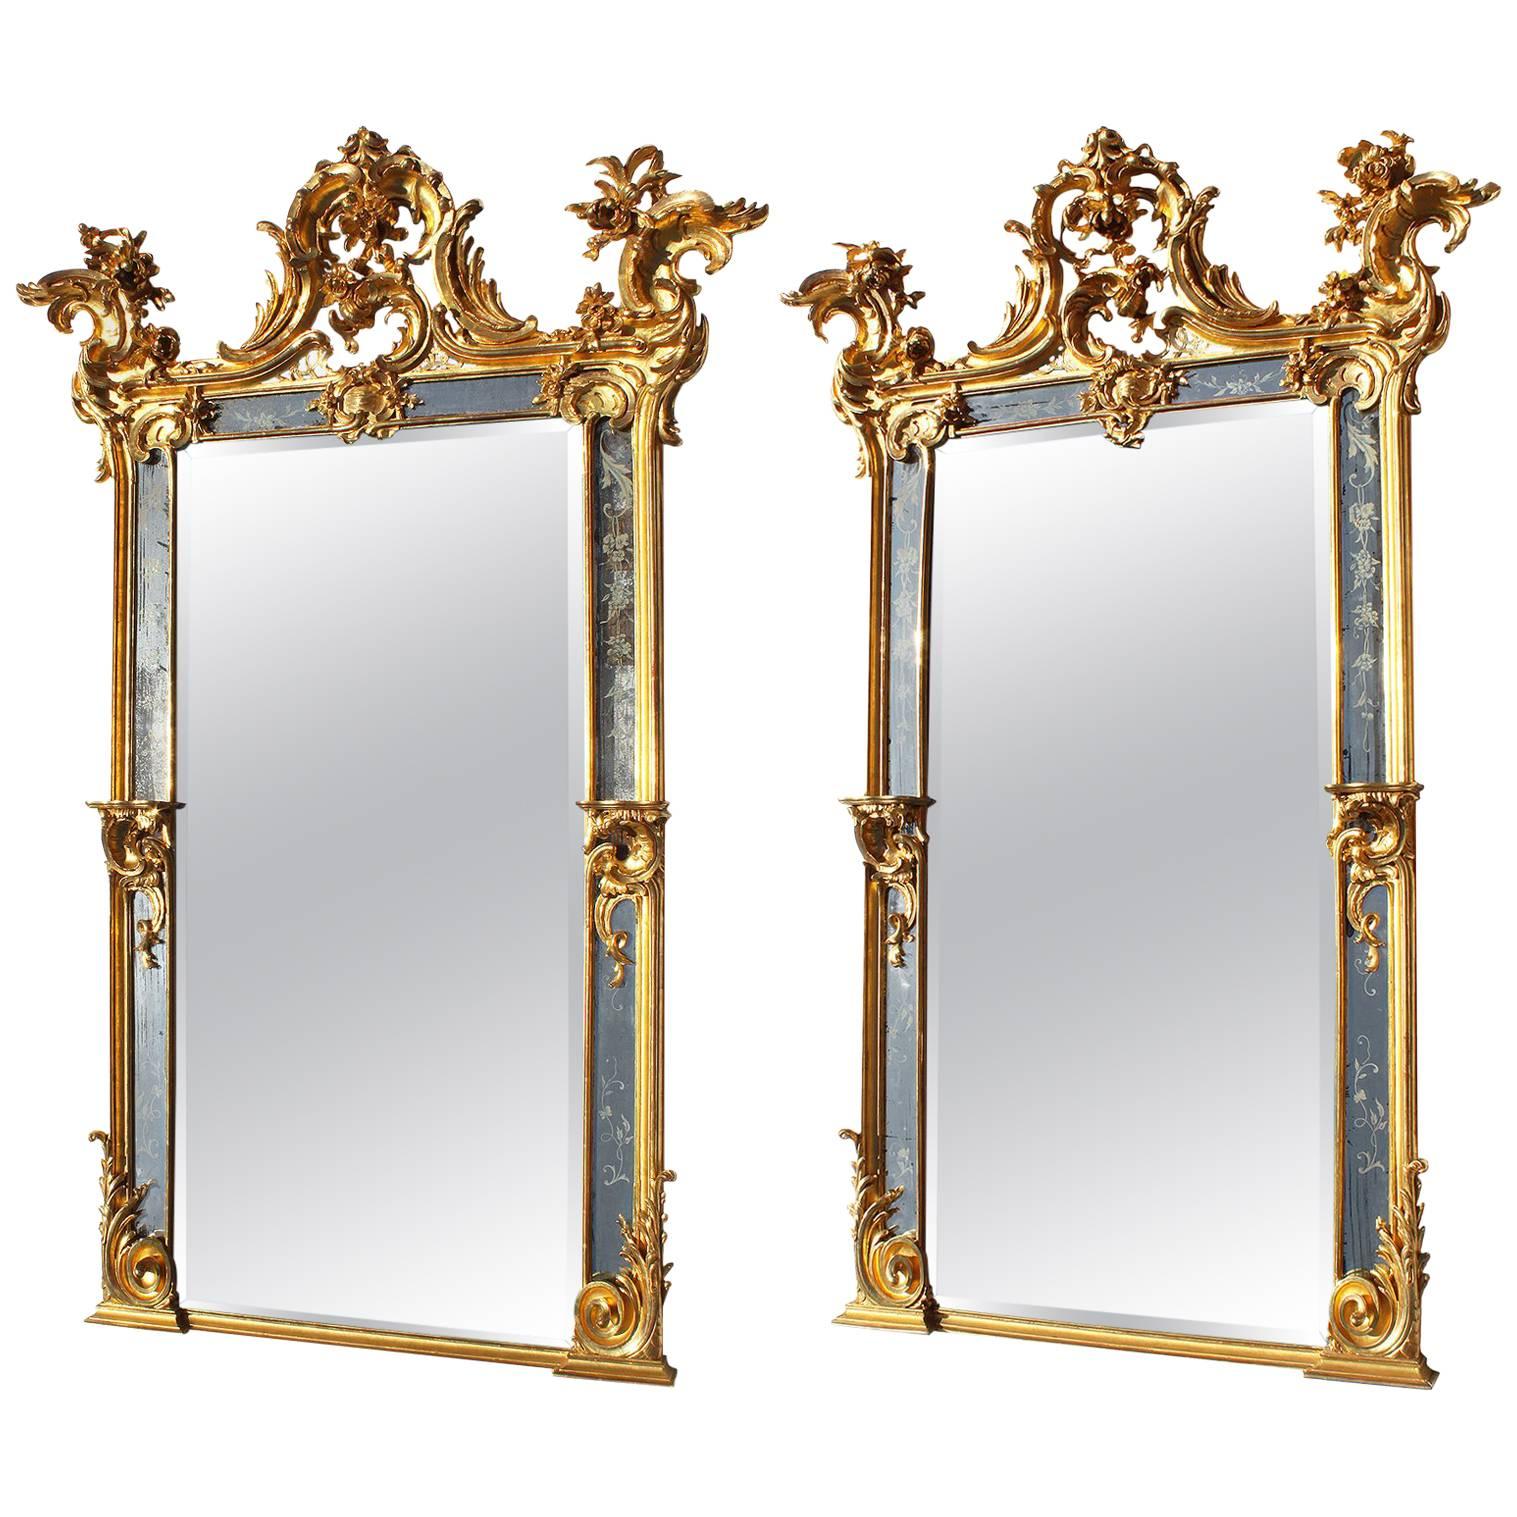 Very Fine Pair of French 19th Century Rococo Style Giltwood Carved Pier Mirrors For Sale